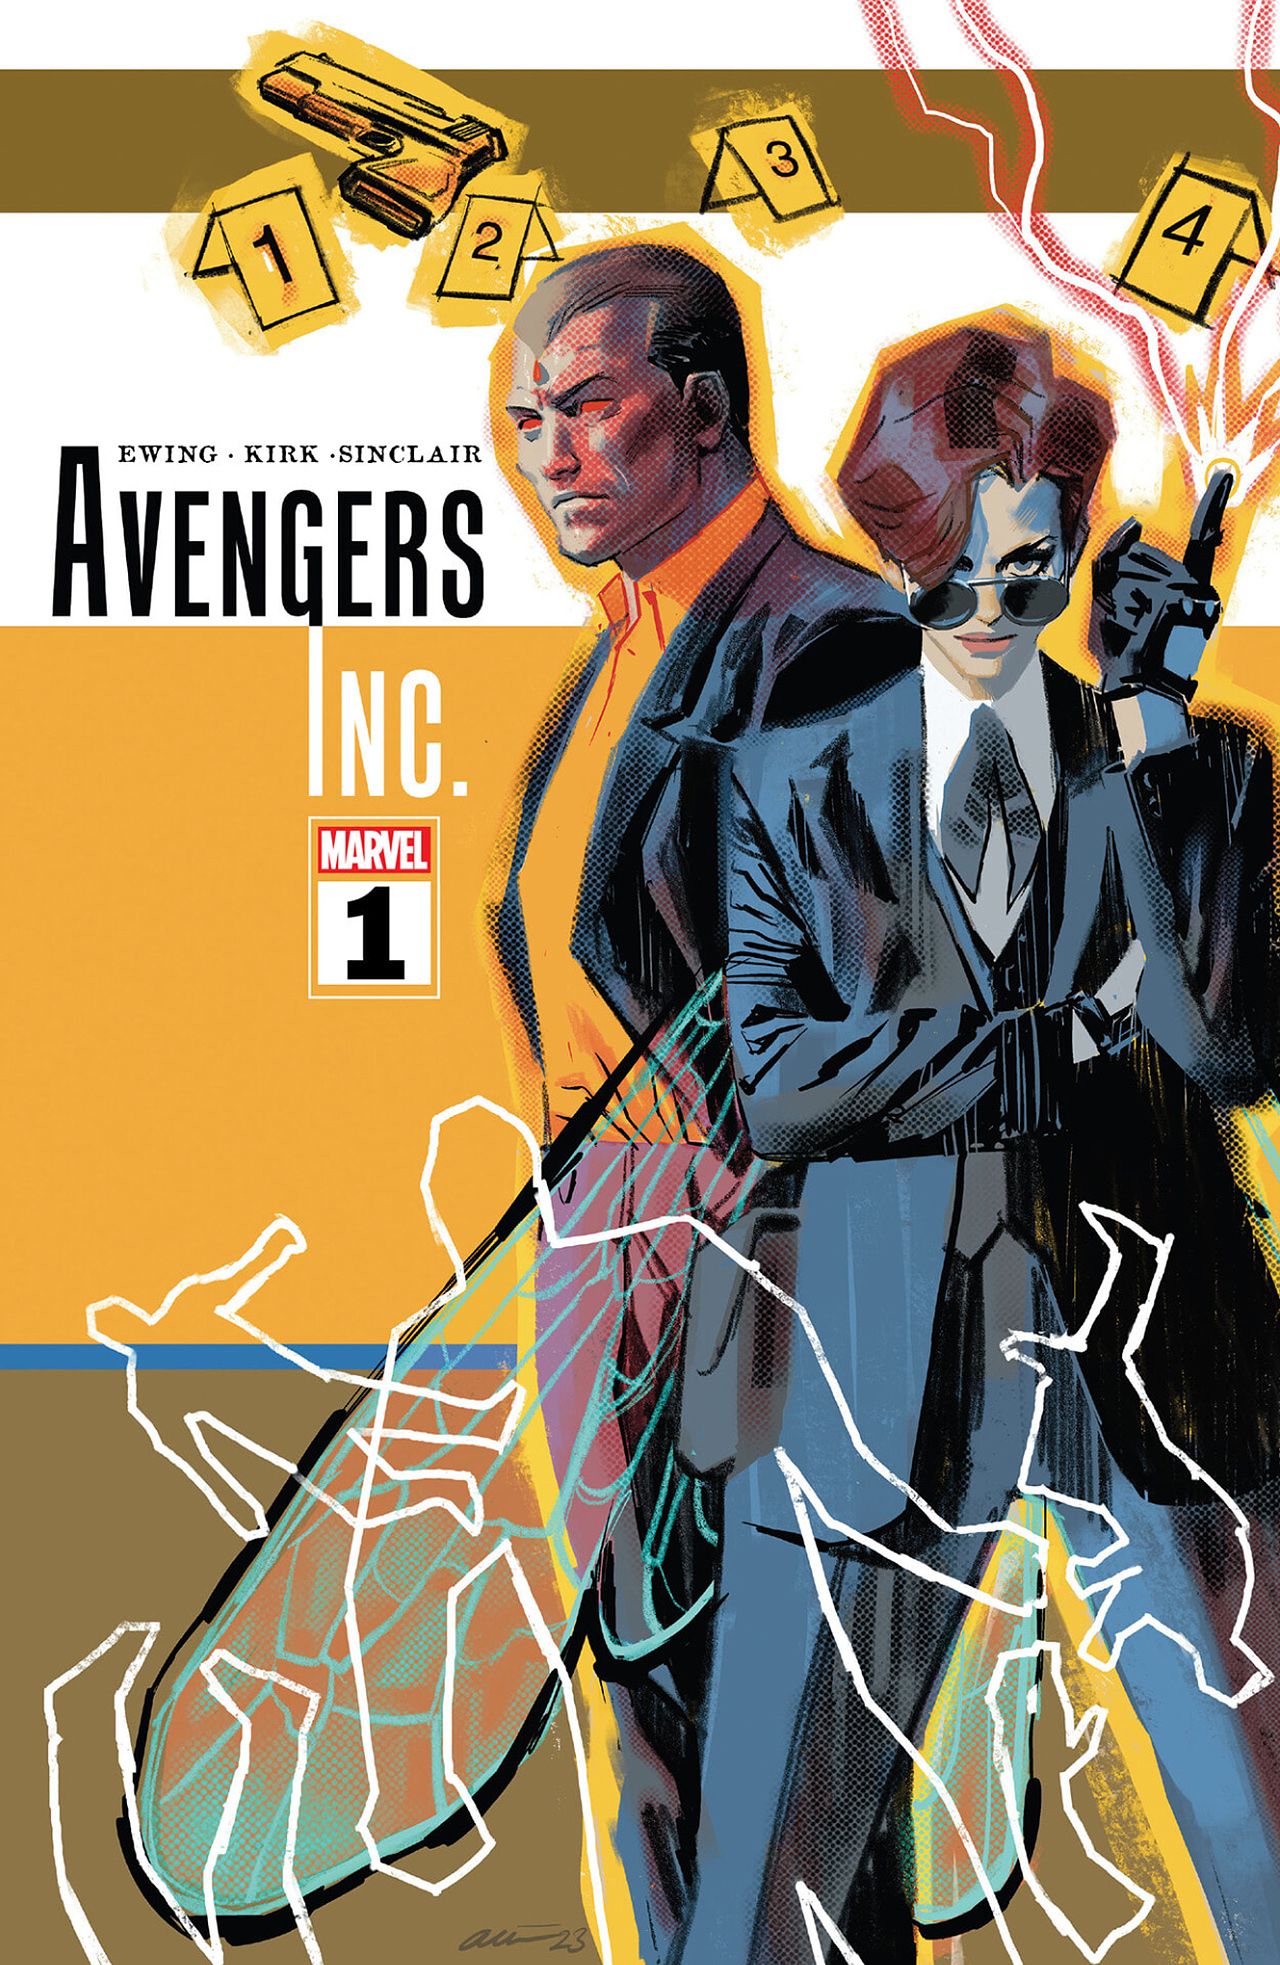 Cover A of Avengers Inc. #1